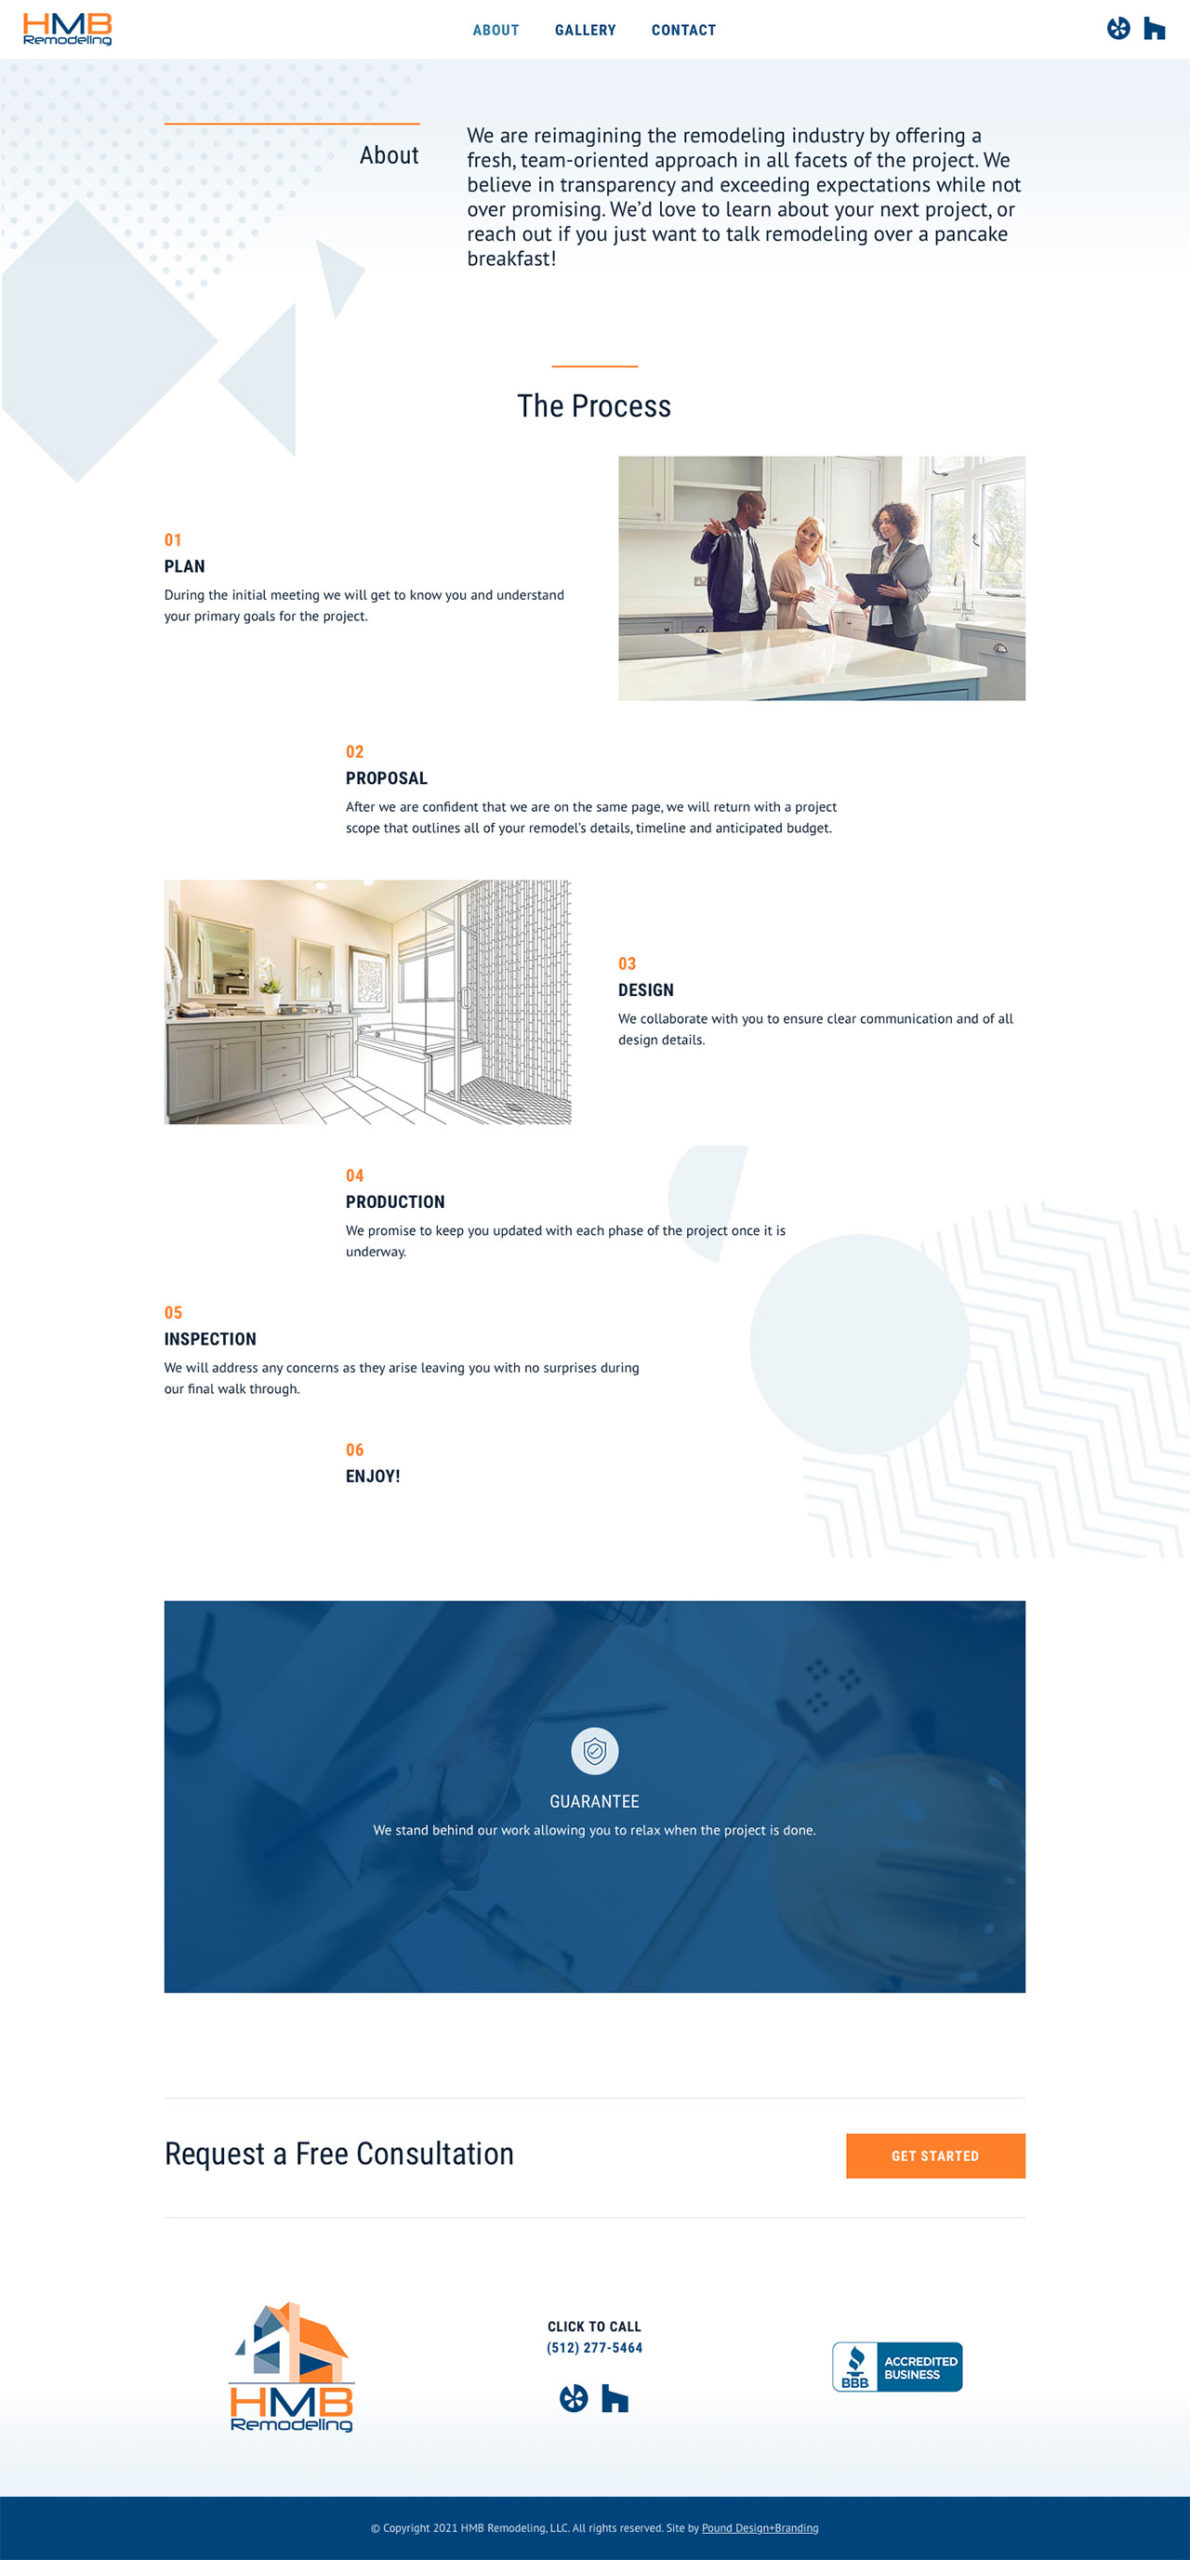 HMB Remodeling website about page design by Pound Design